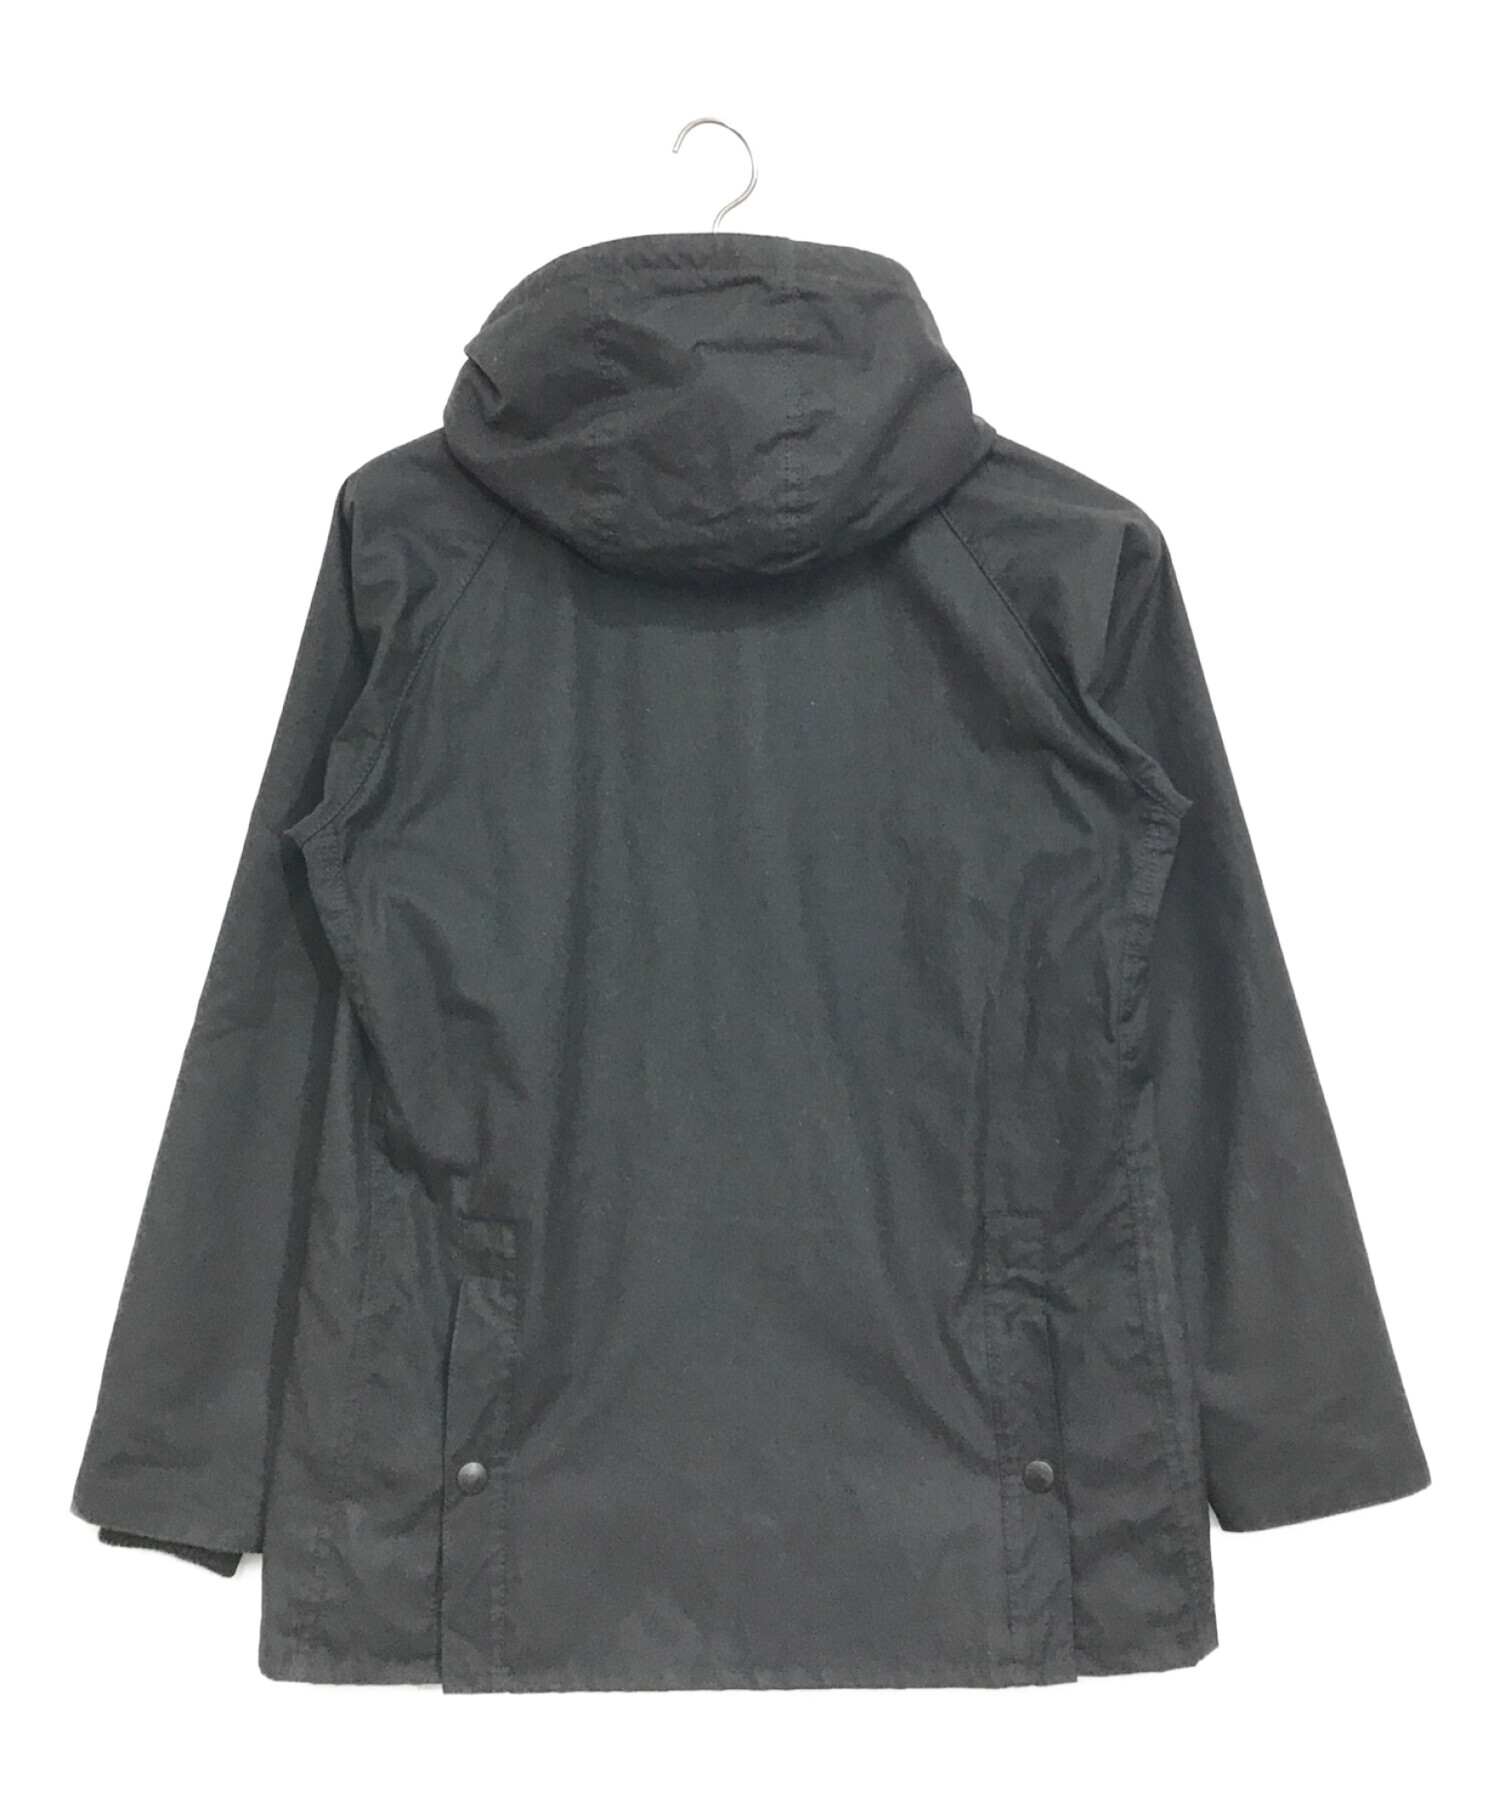 Barbour バブアー HOODED BEDALE SL ブラック 38-